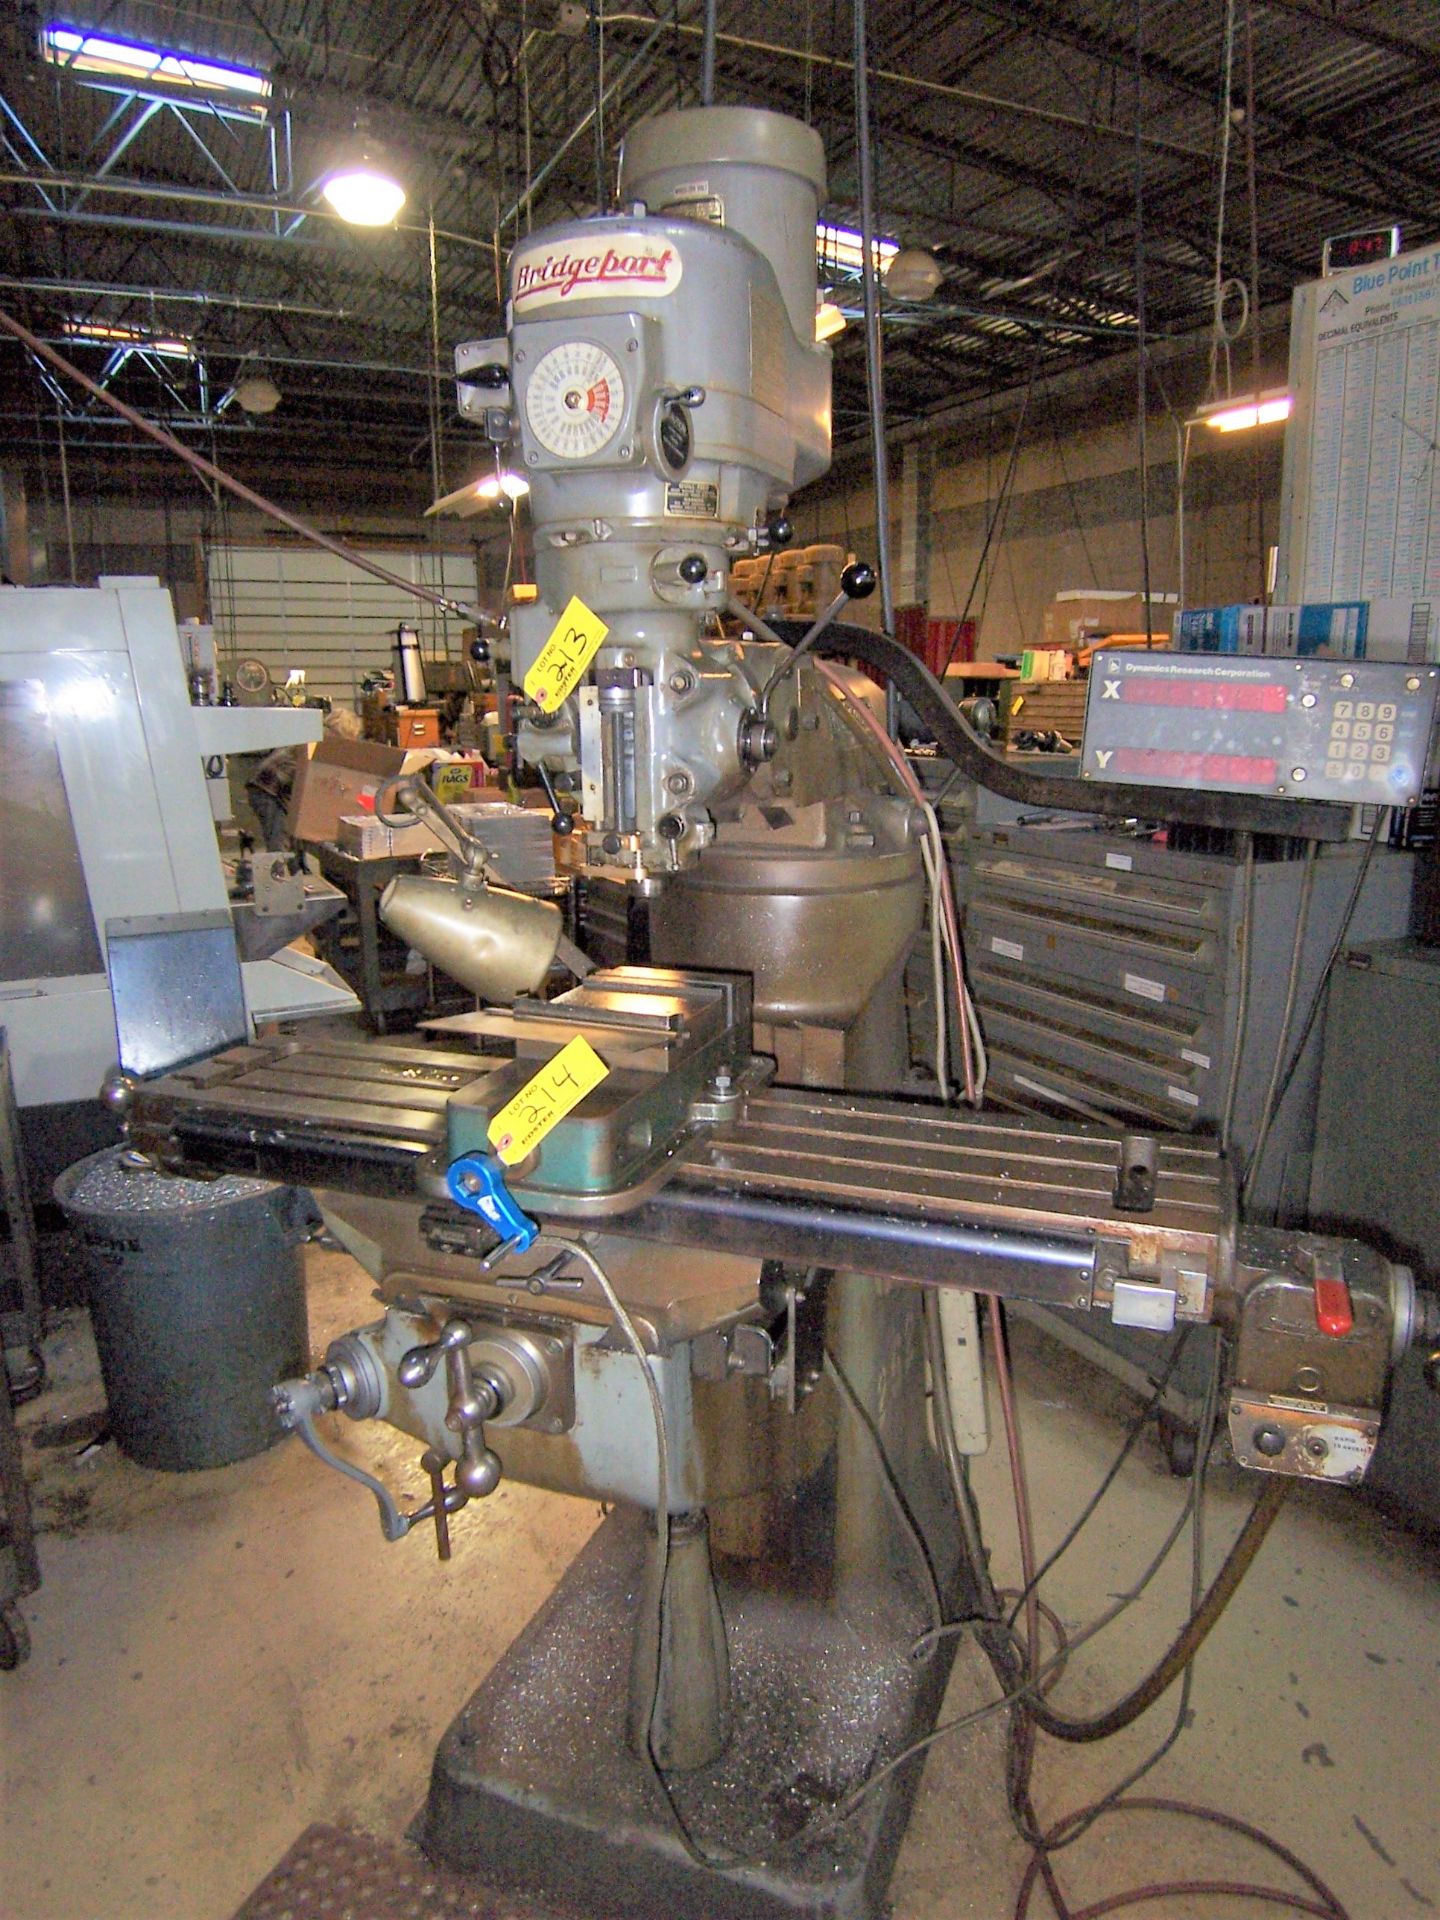 BRIDGEPORT VERTICAL MILLING MACHINE, WITH 9" X 42" POWER FEED TABLE, SPINDLE SPEEDS 60-4200 RPM, DRC - Image 2 of 2